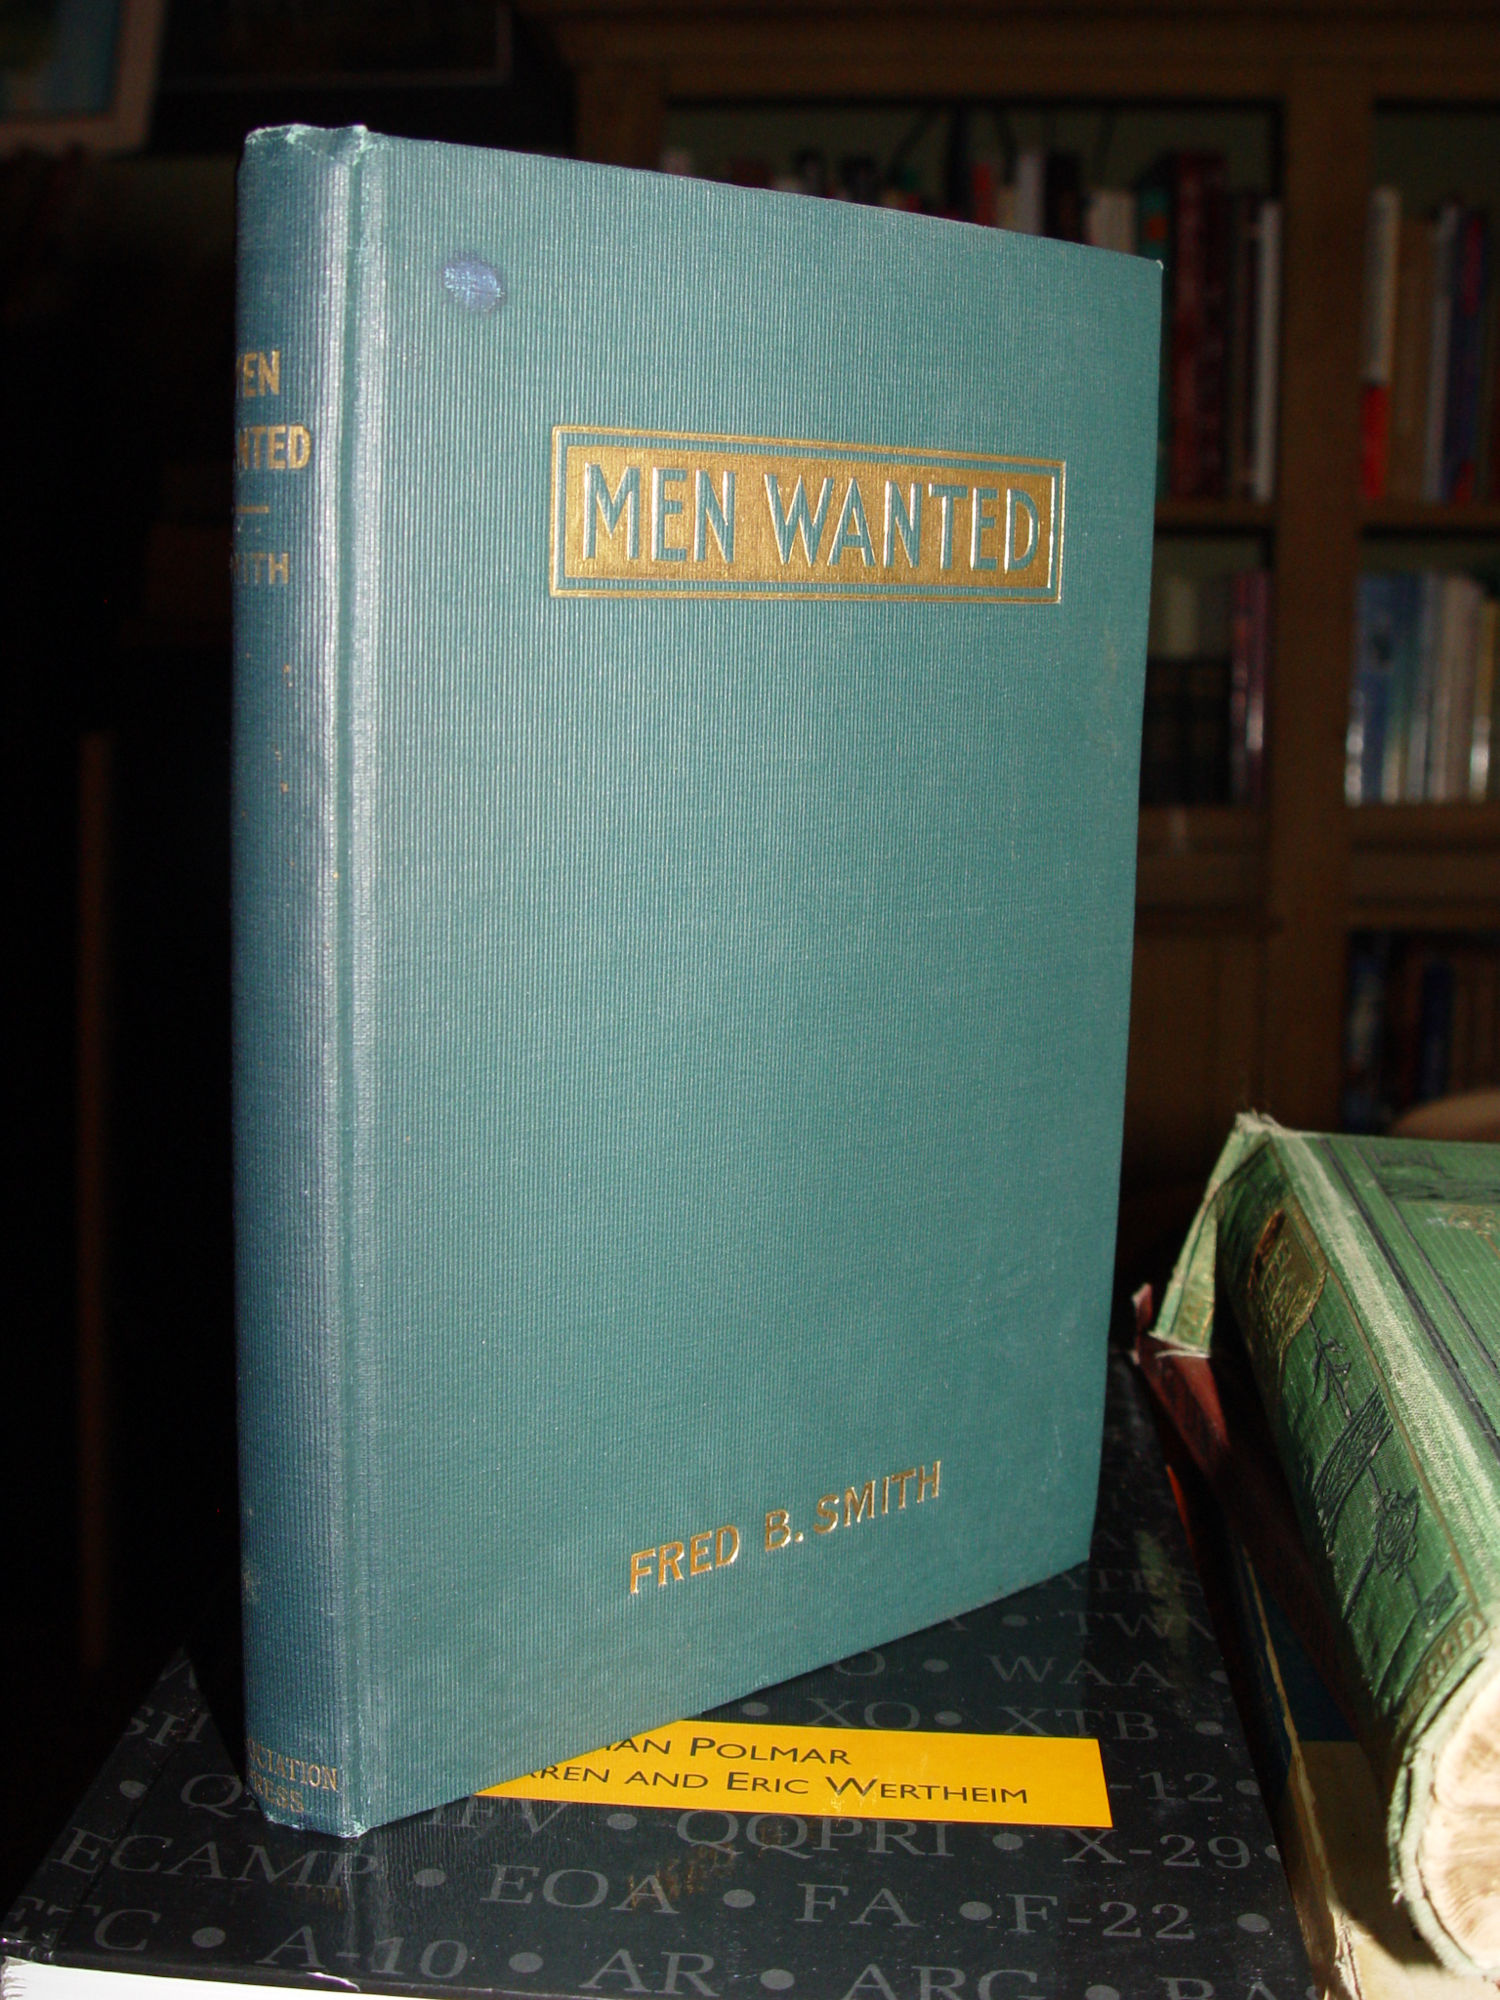 Men wanted 1911 by
                            Fred Burton Smith (American evangelist)